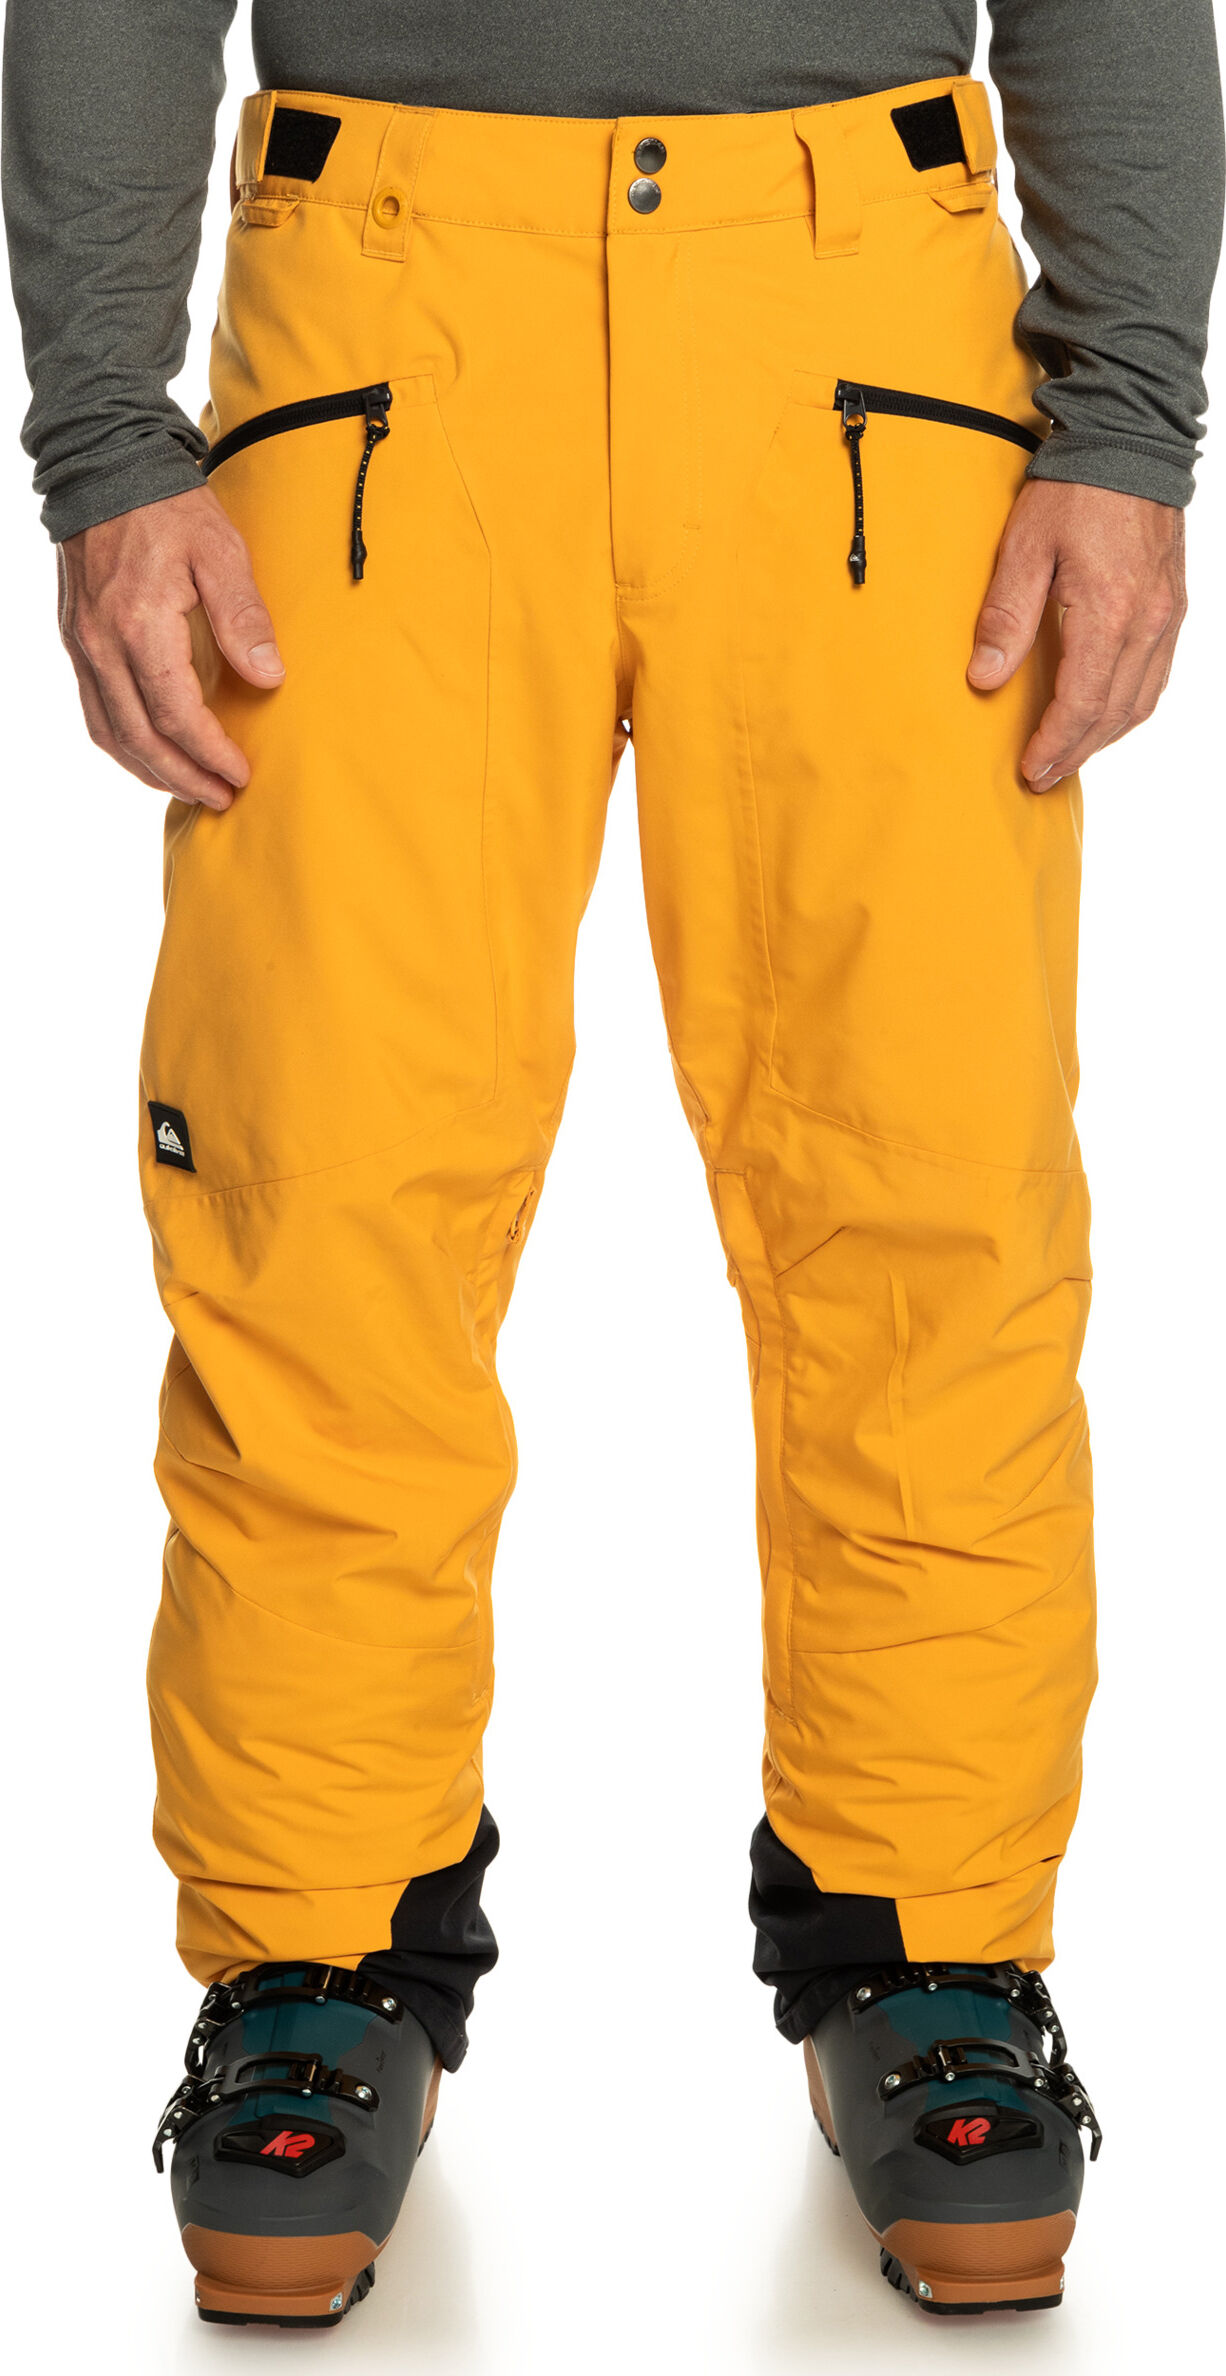 Quiksilver BOUNDRY MINERAL YELLOW S